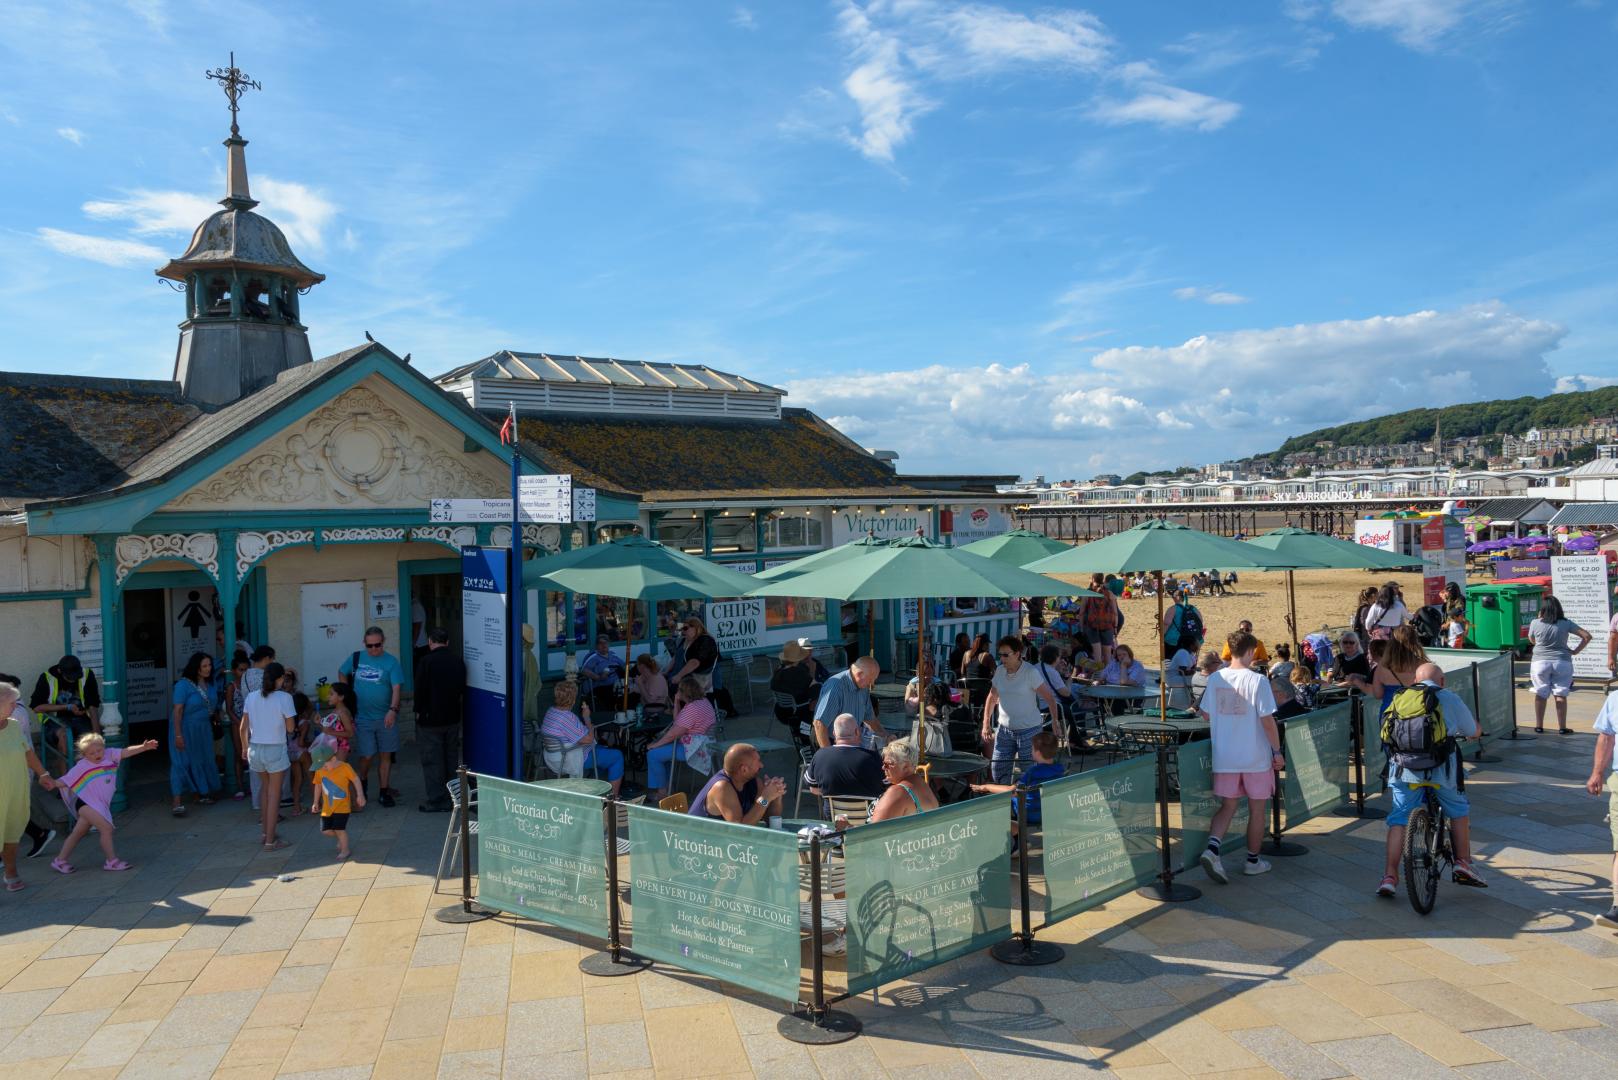 The Victorian cafe on a sunny day. People sit outside the building under umbrellas, and the beach is visible in the background